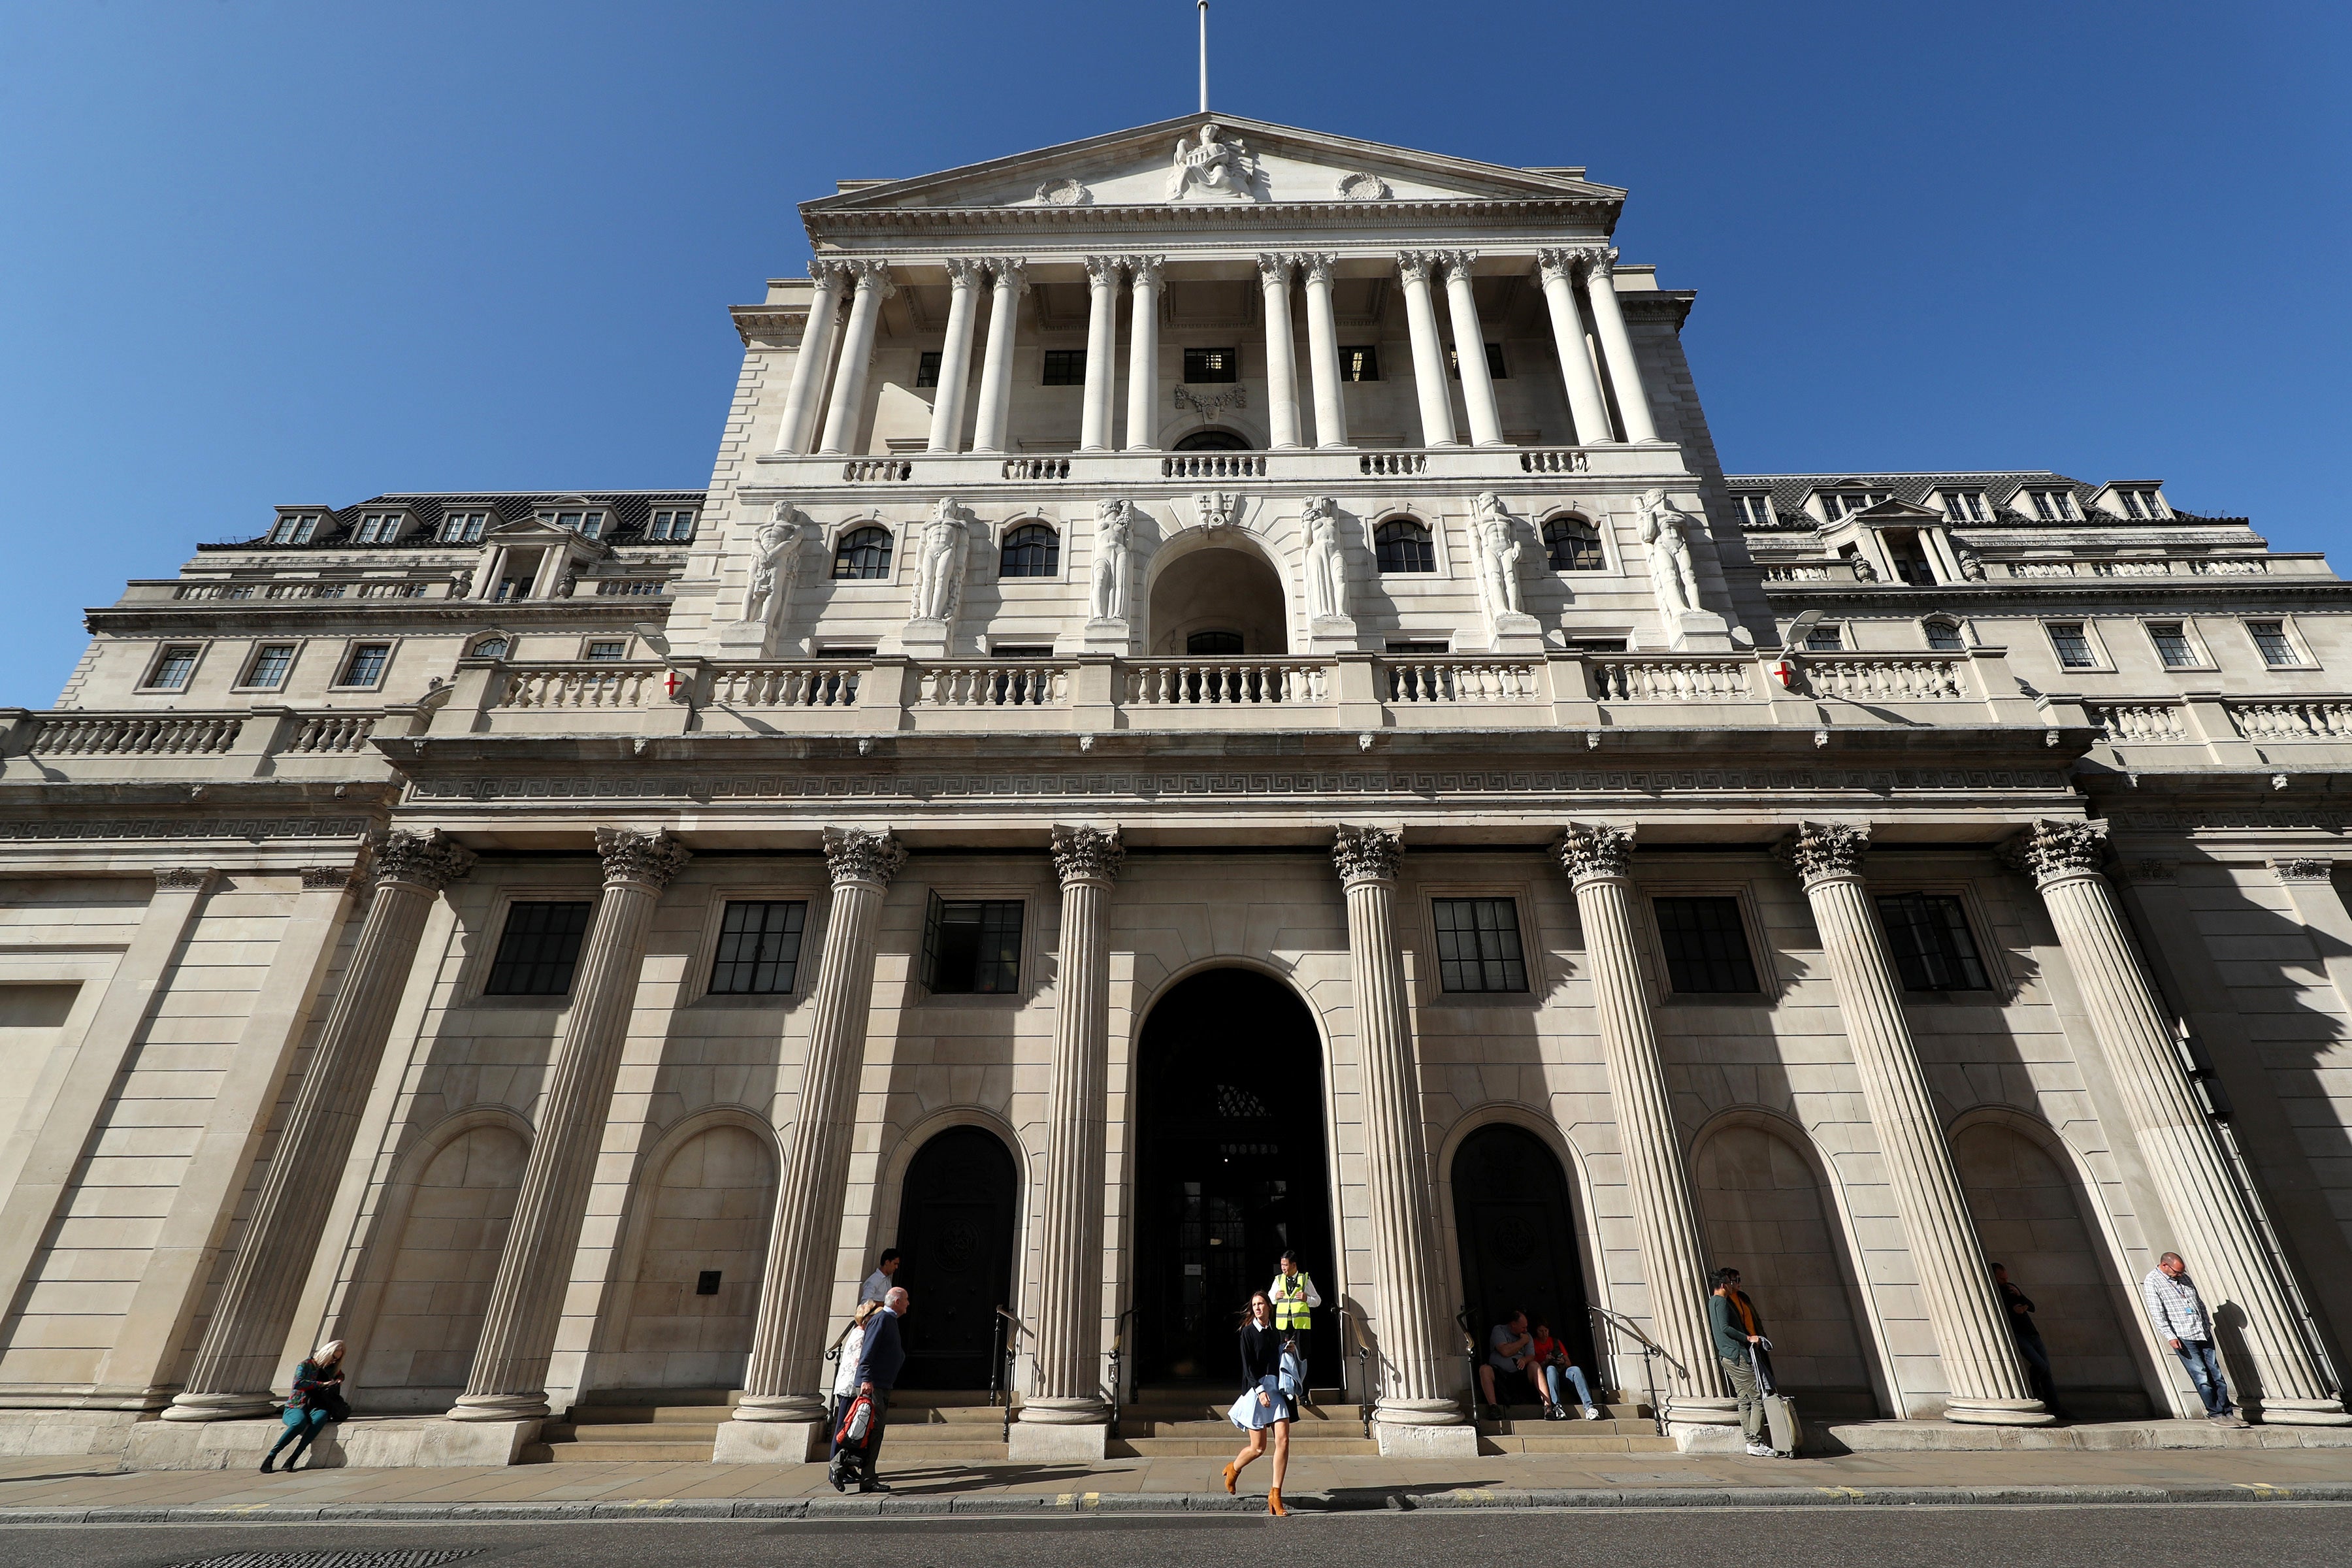 The Bank of England has raised interest rates again to help cool rocketing inflation.